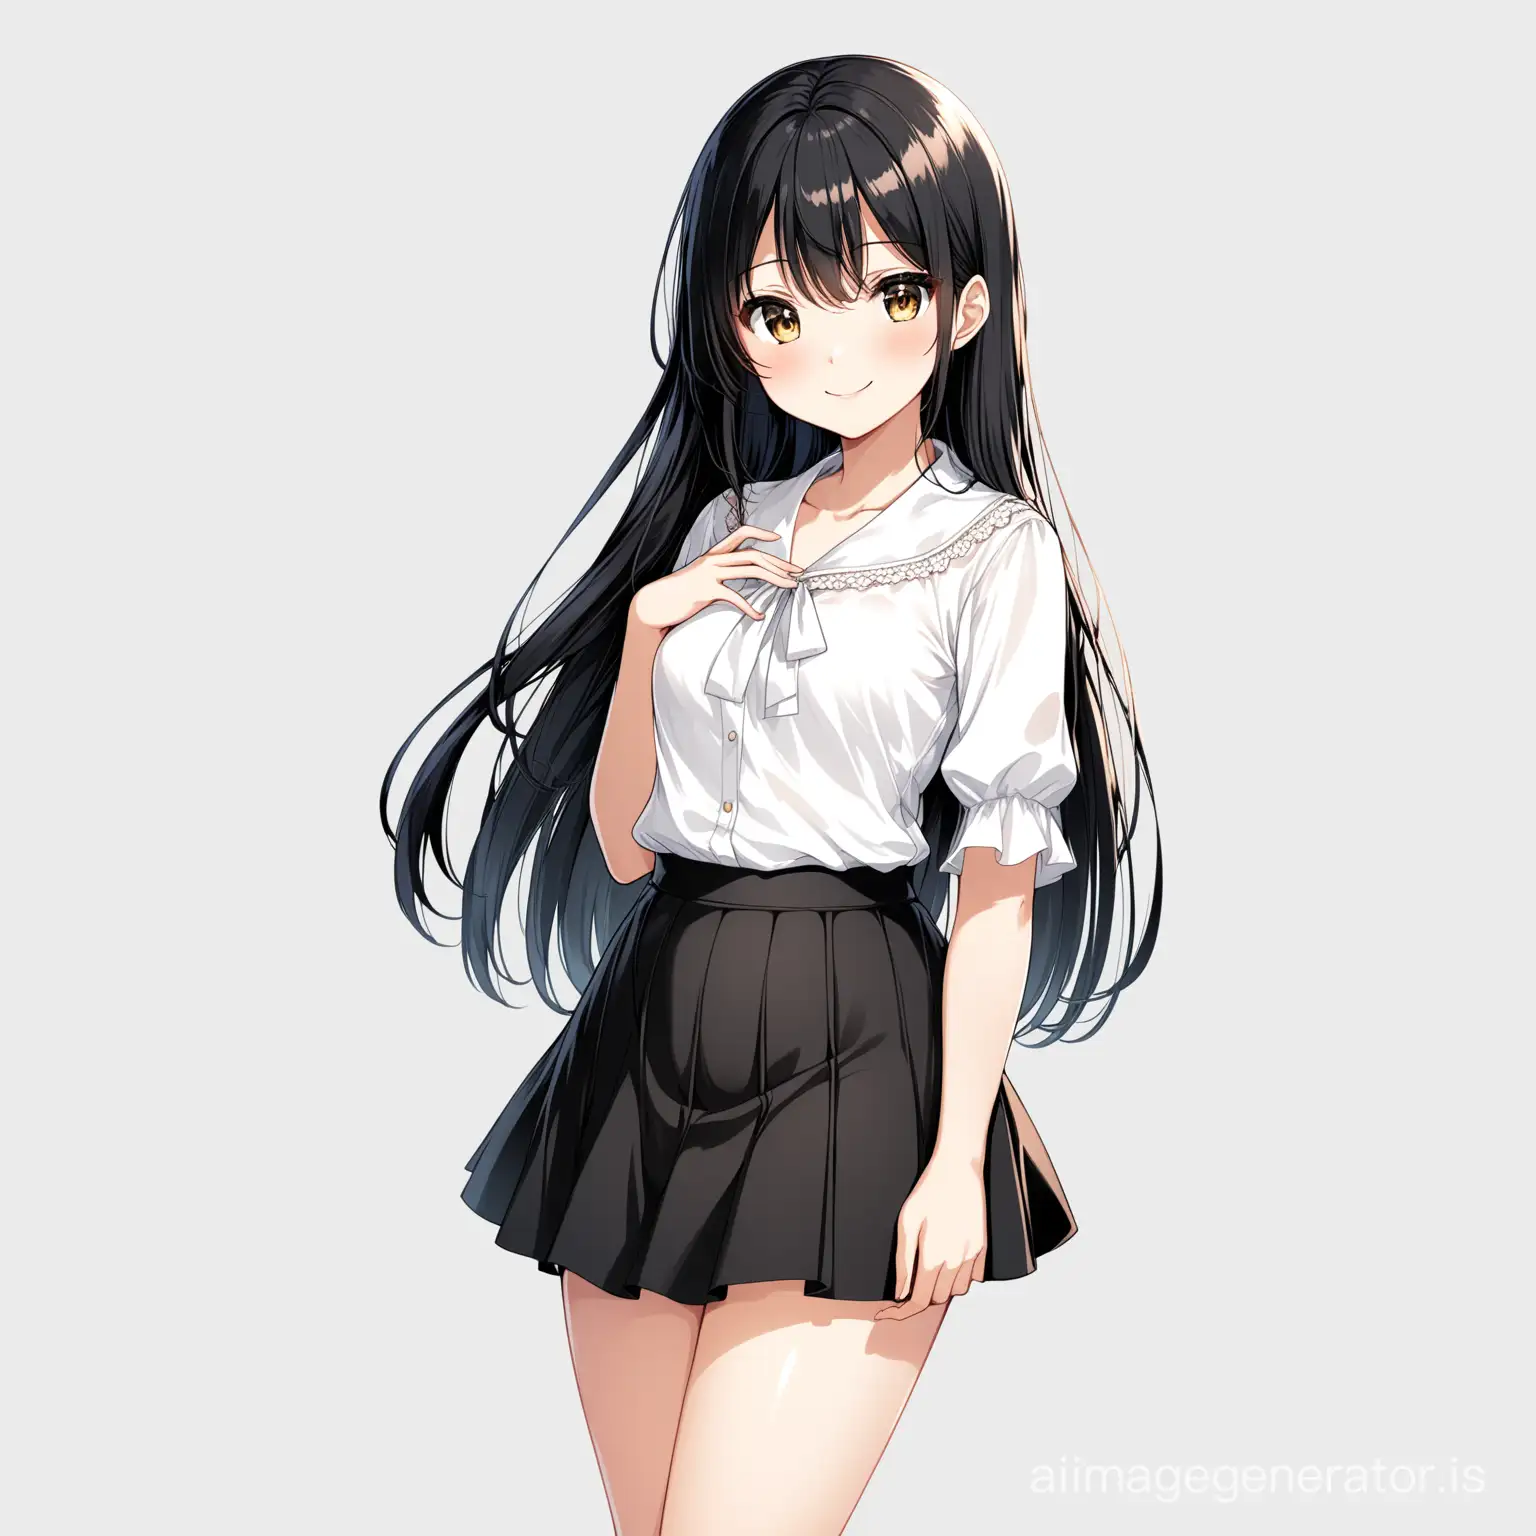 Smiling-Anime-Girl-with-Black-Skirt-and-White-Blouse